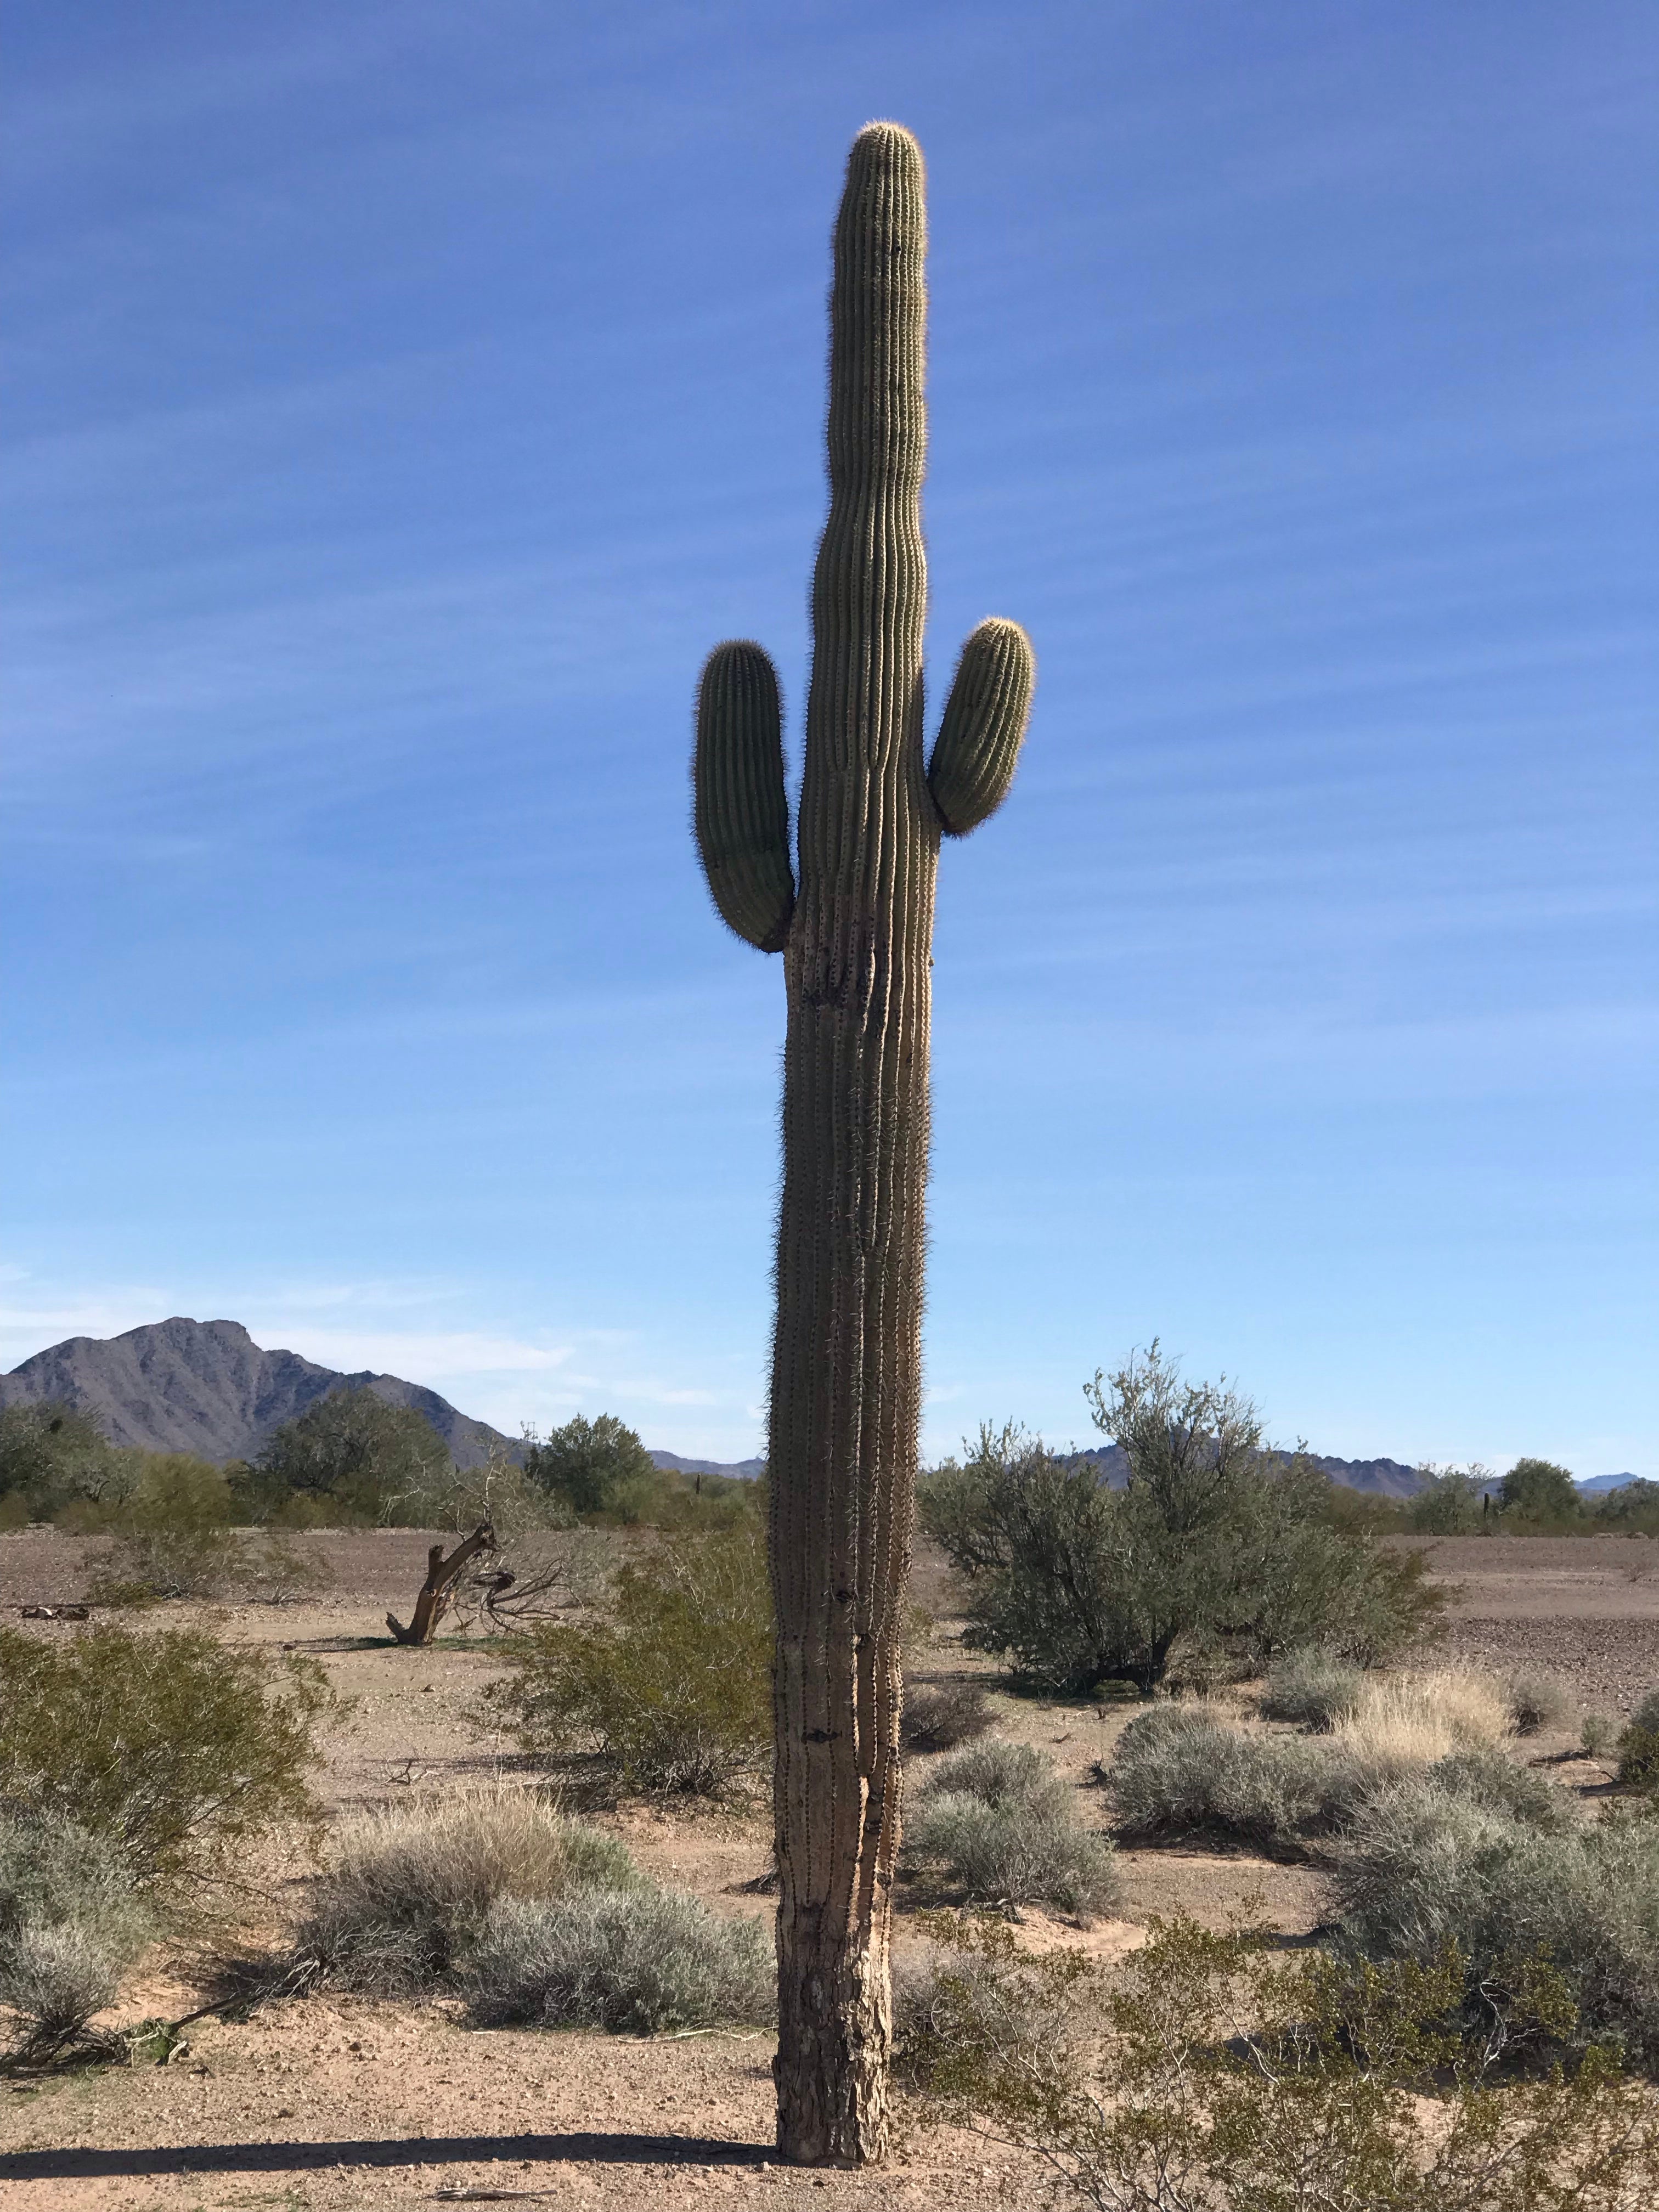 Saguaro Cactus 🌵 

Sooooo pretty there!!

www.hitched4fun.com 
🤓 Delivering fun while hitched! 🏕 